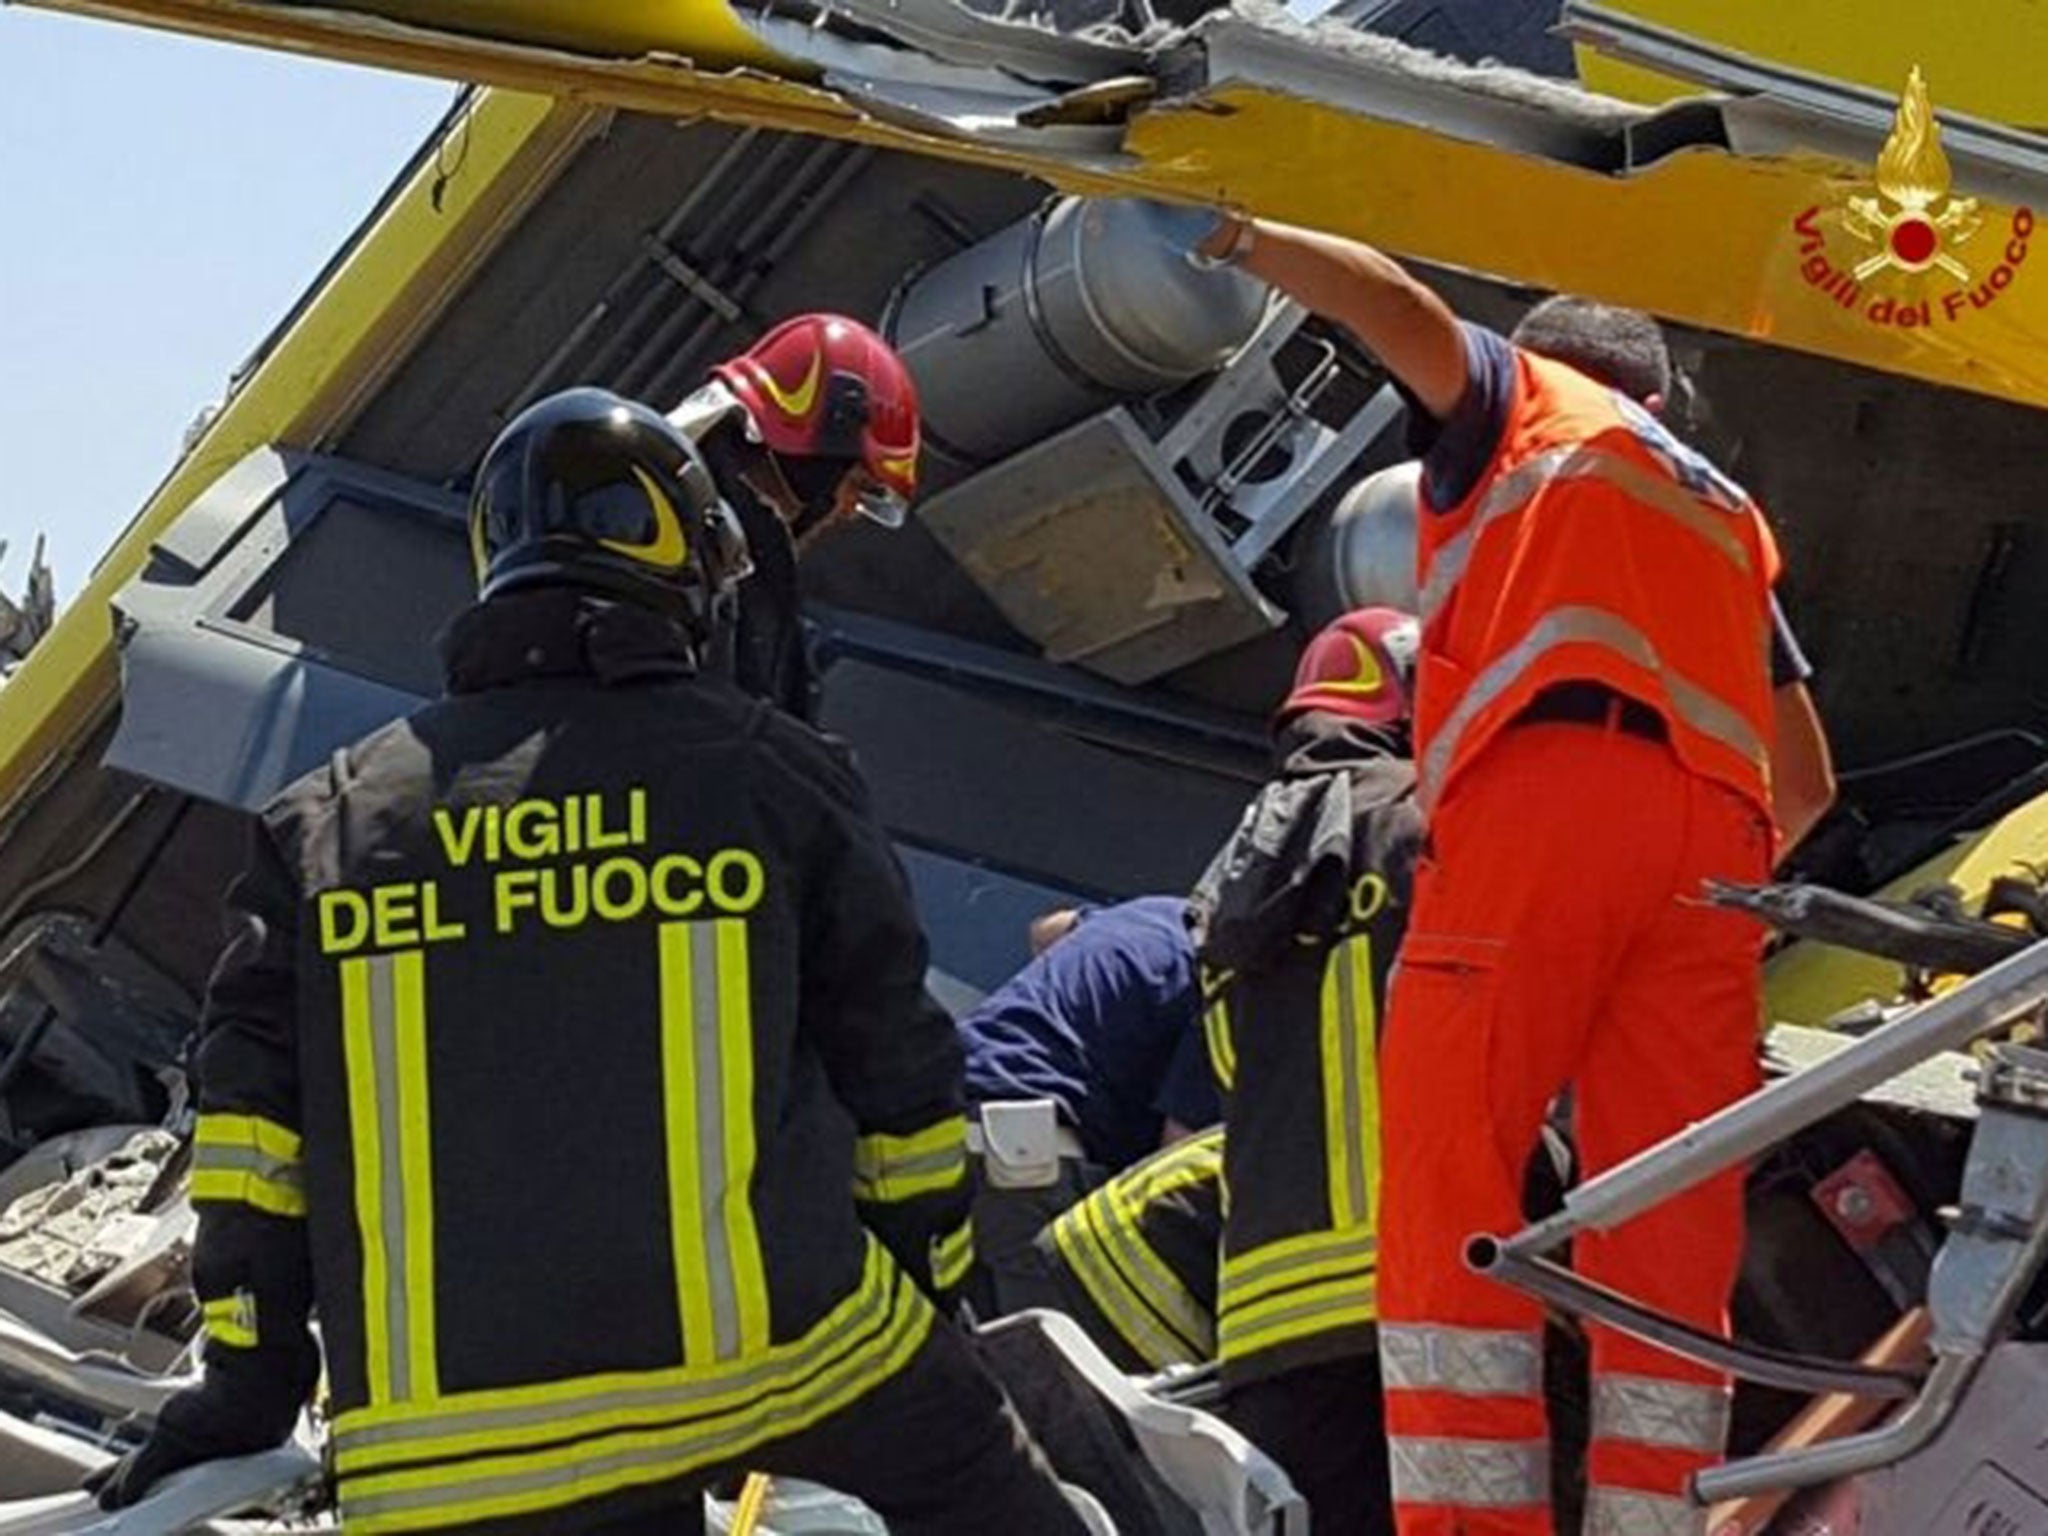 Firefighters work at the site where two passenger trains collided in the middle of an olive grove in the southern village of Corato, near Bari, Italy, in this handout picture released by Italian Firefighters, 12 July, 2016